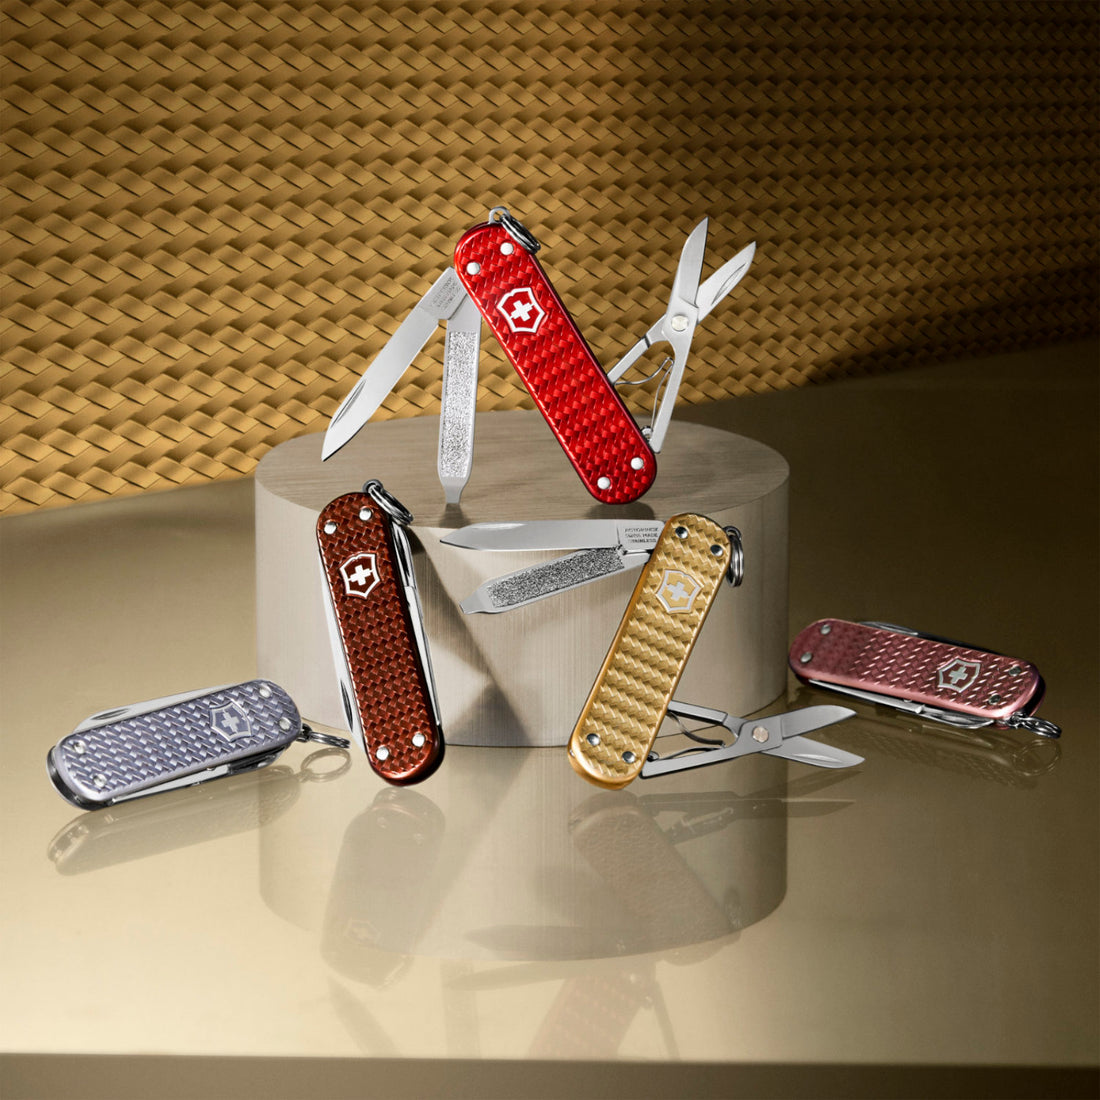 New! Precious Alox Classic SD Swiss Army Knives Now at Swiss Knife Shop!